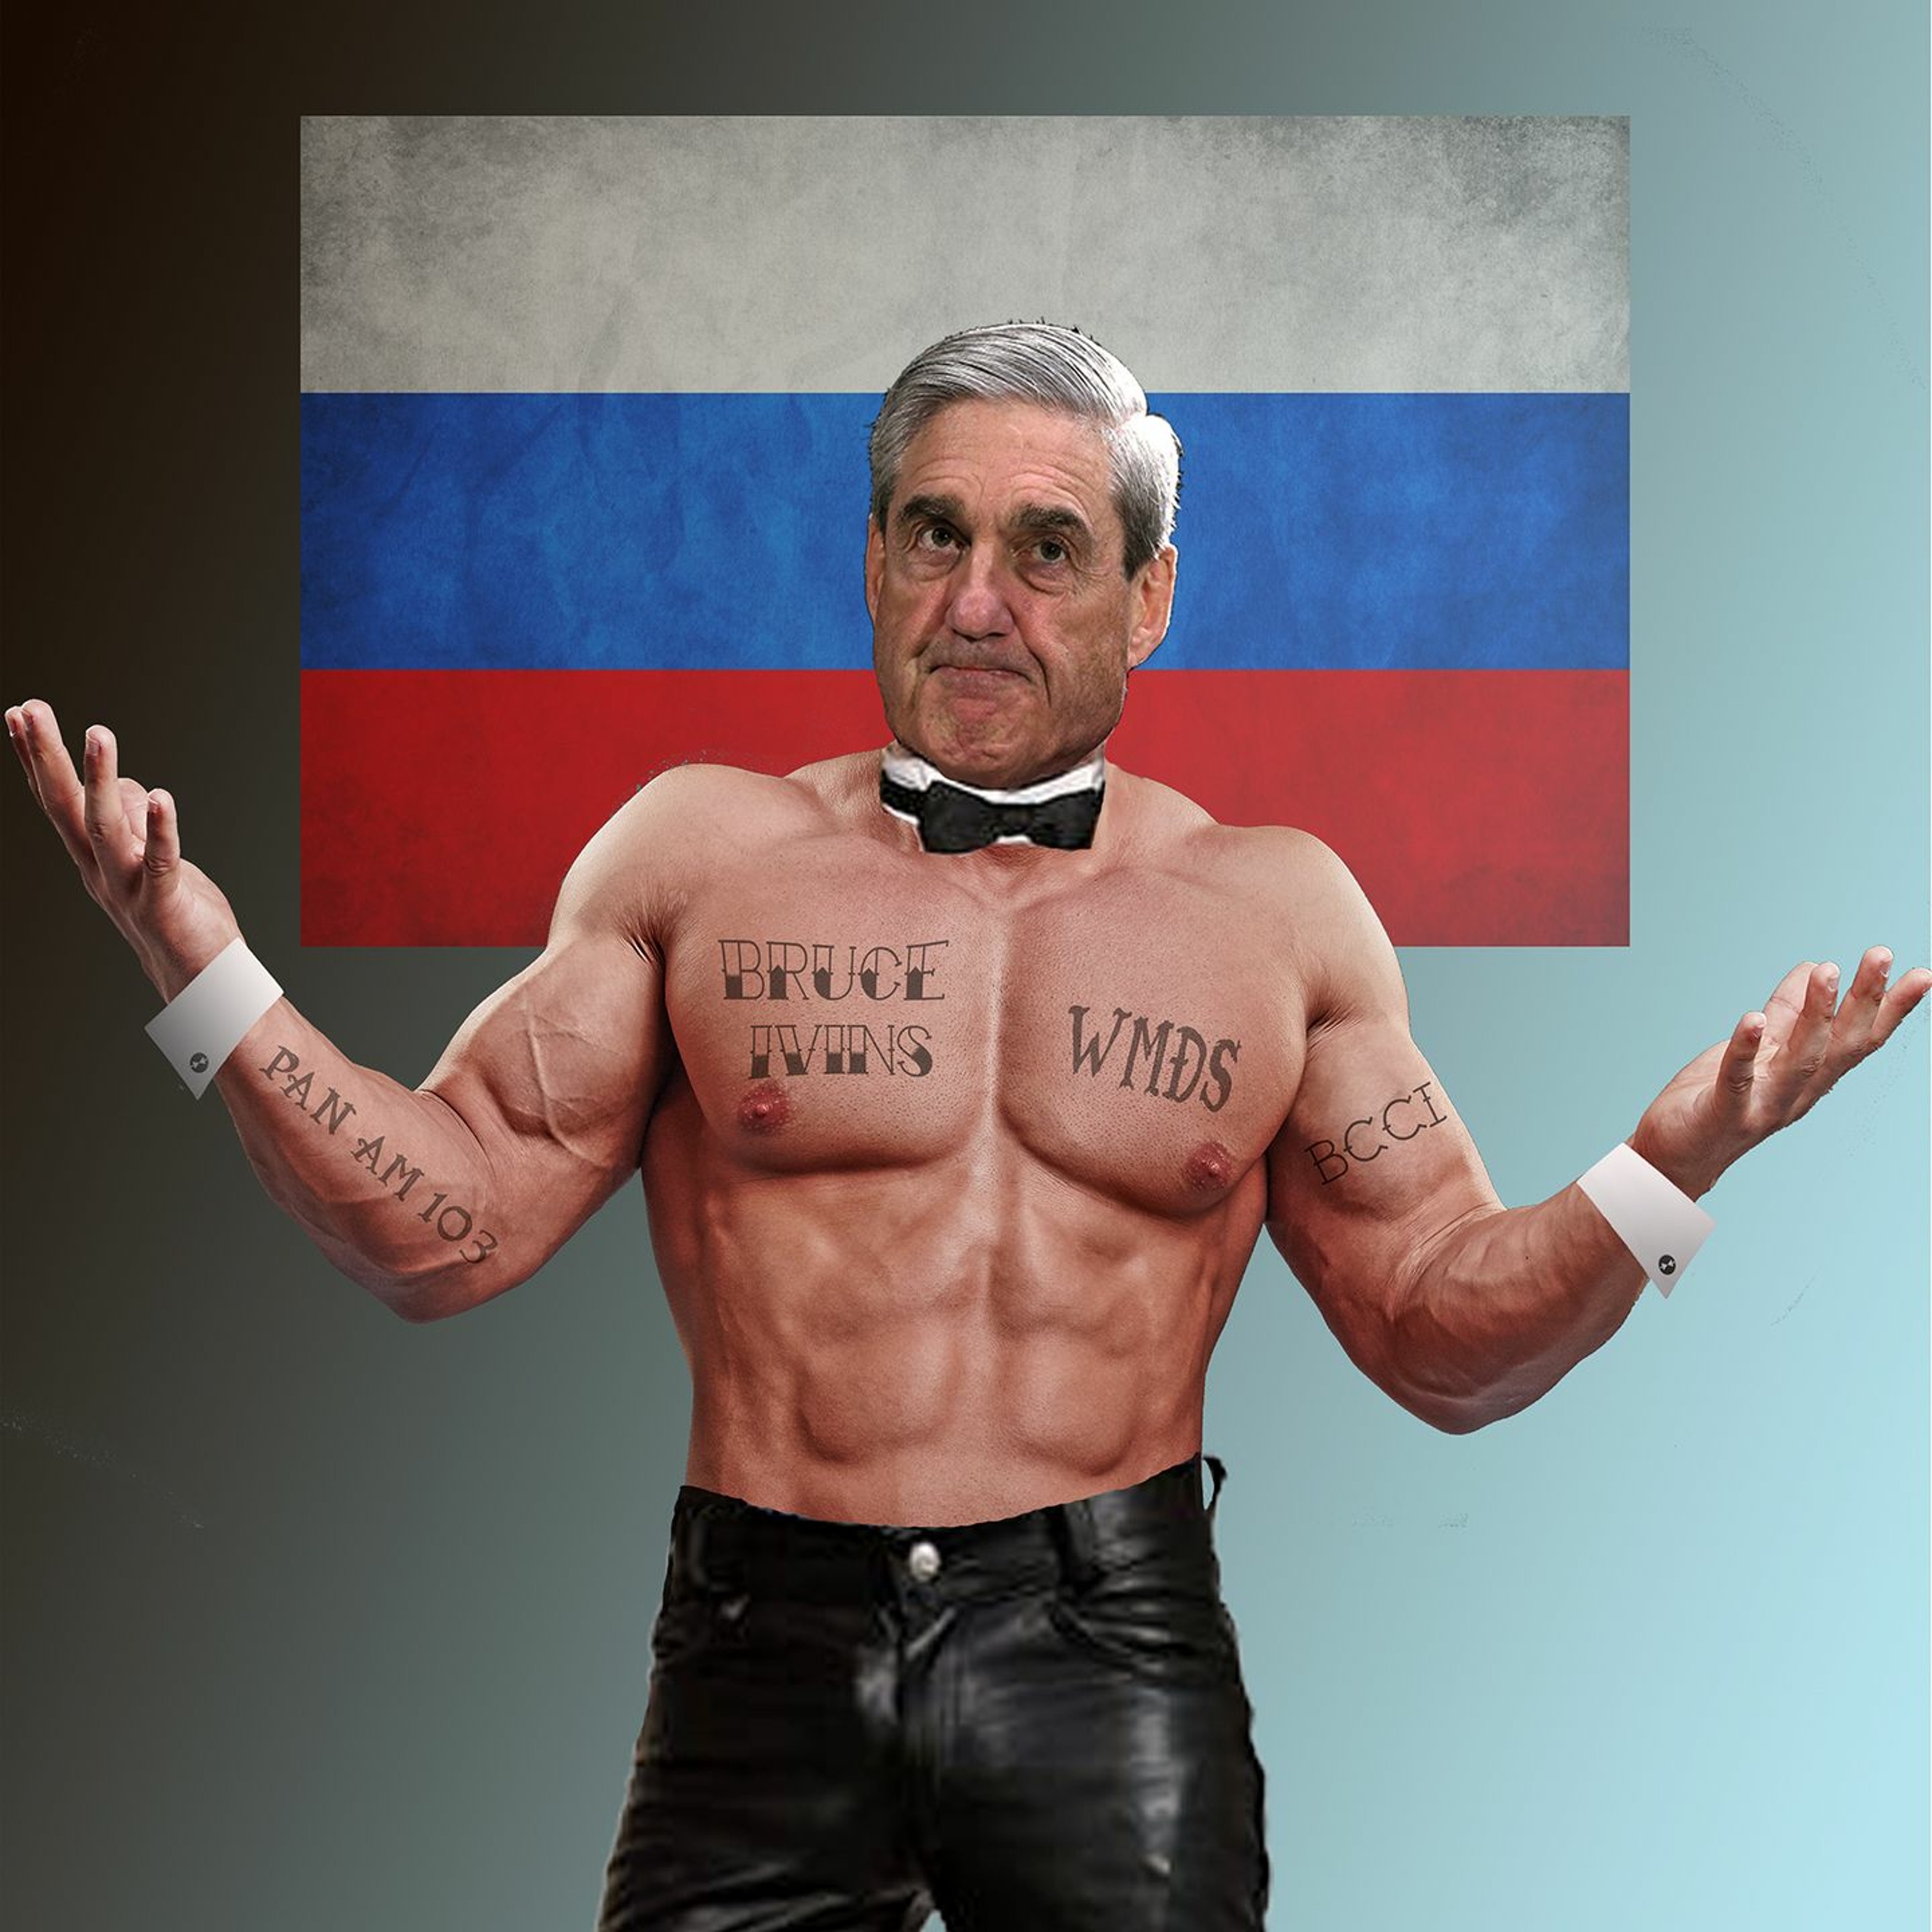 Mueller Time Fail, 5 Years of Putin Hysteria, Real Goal of Russiagate?